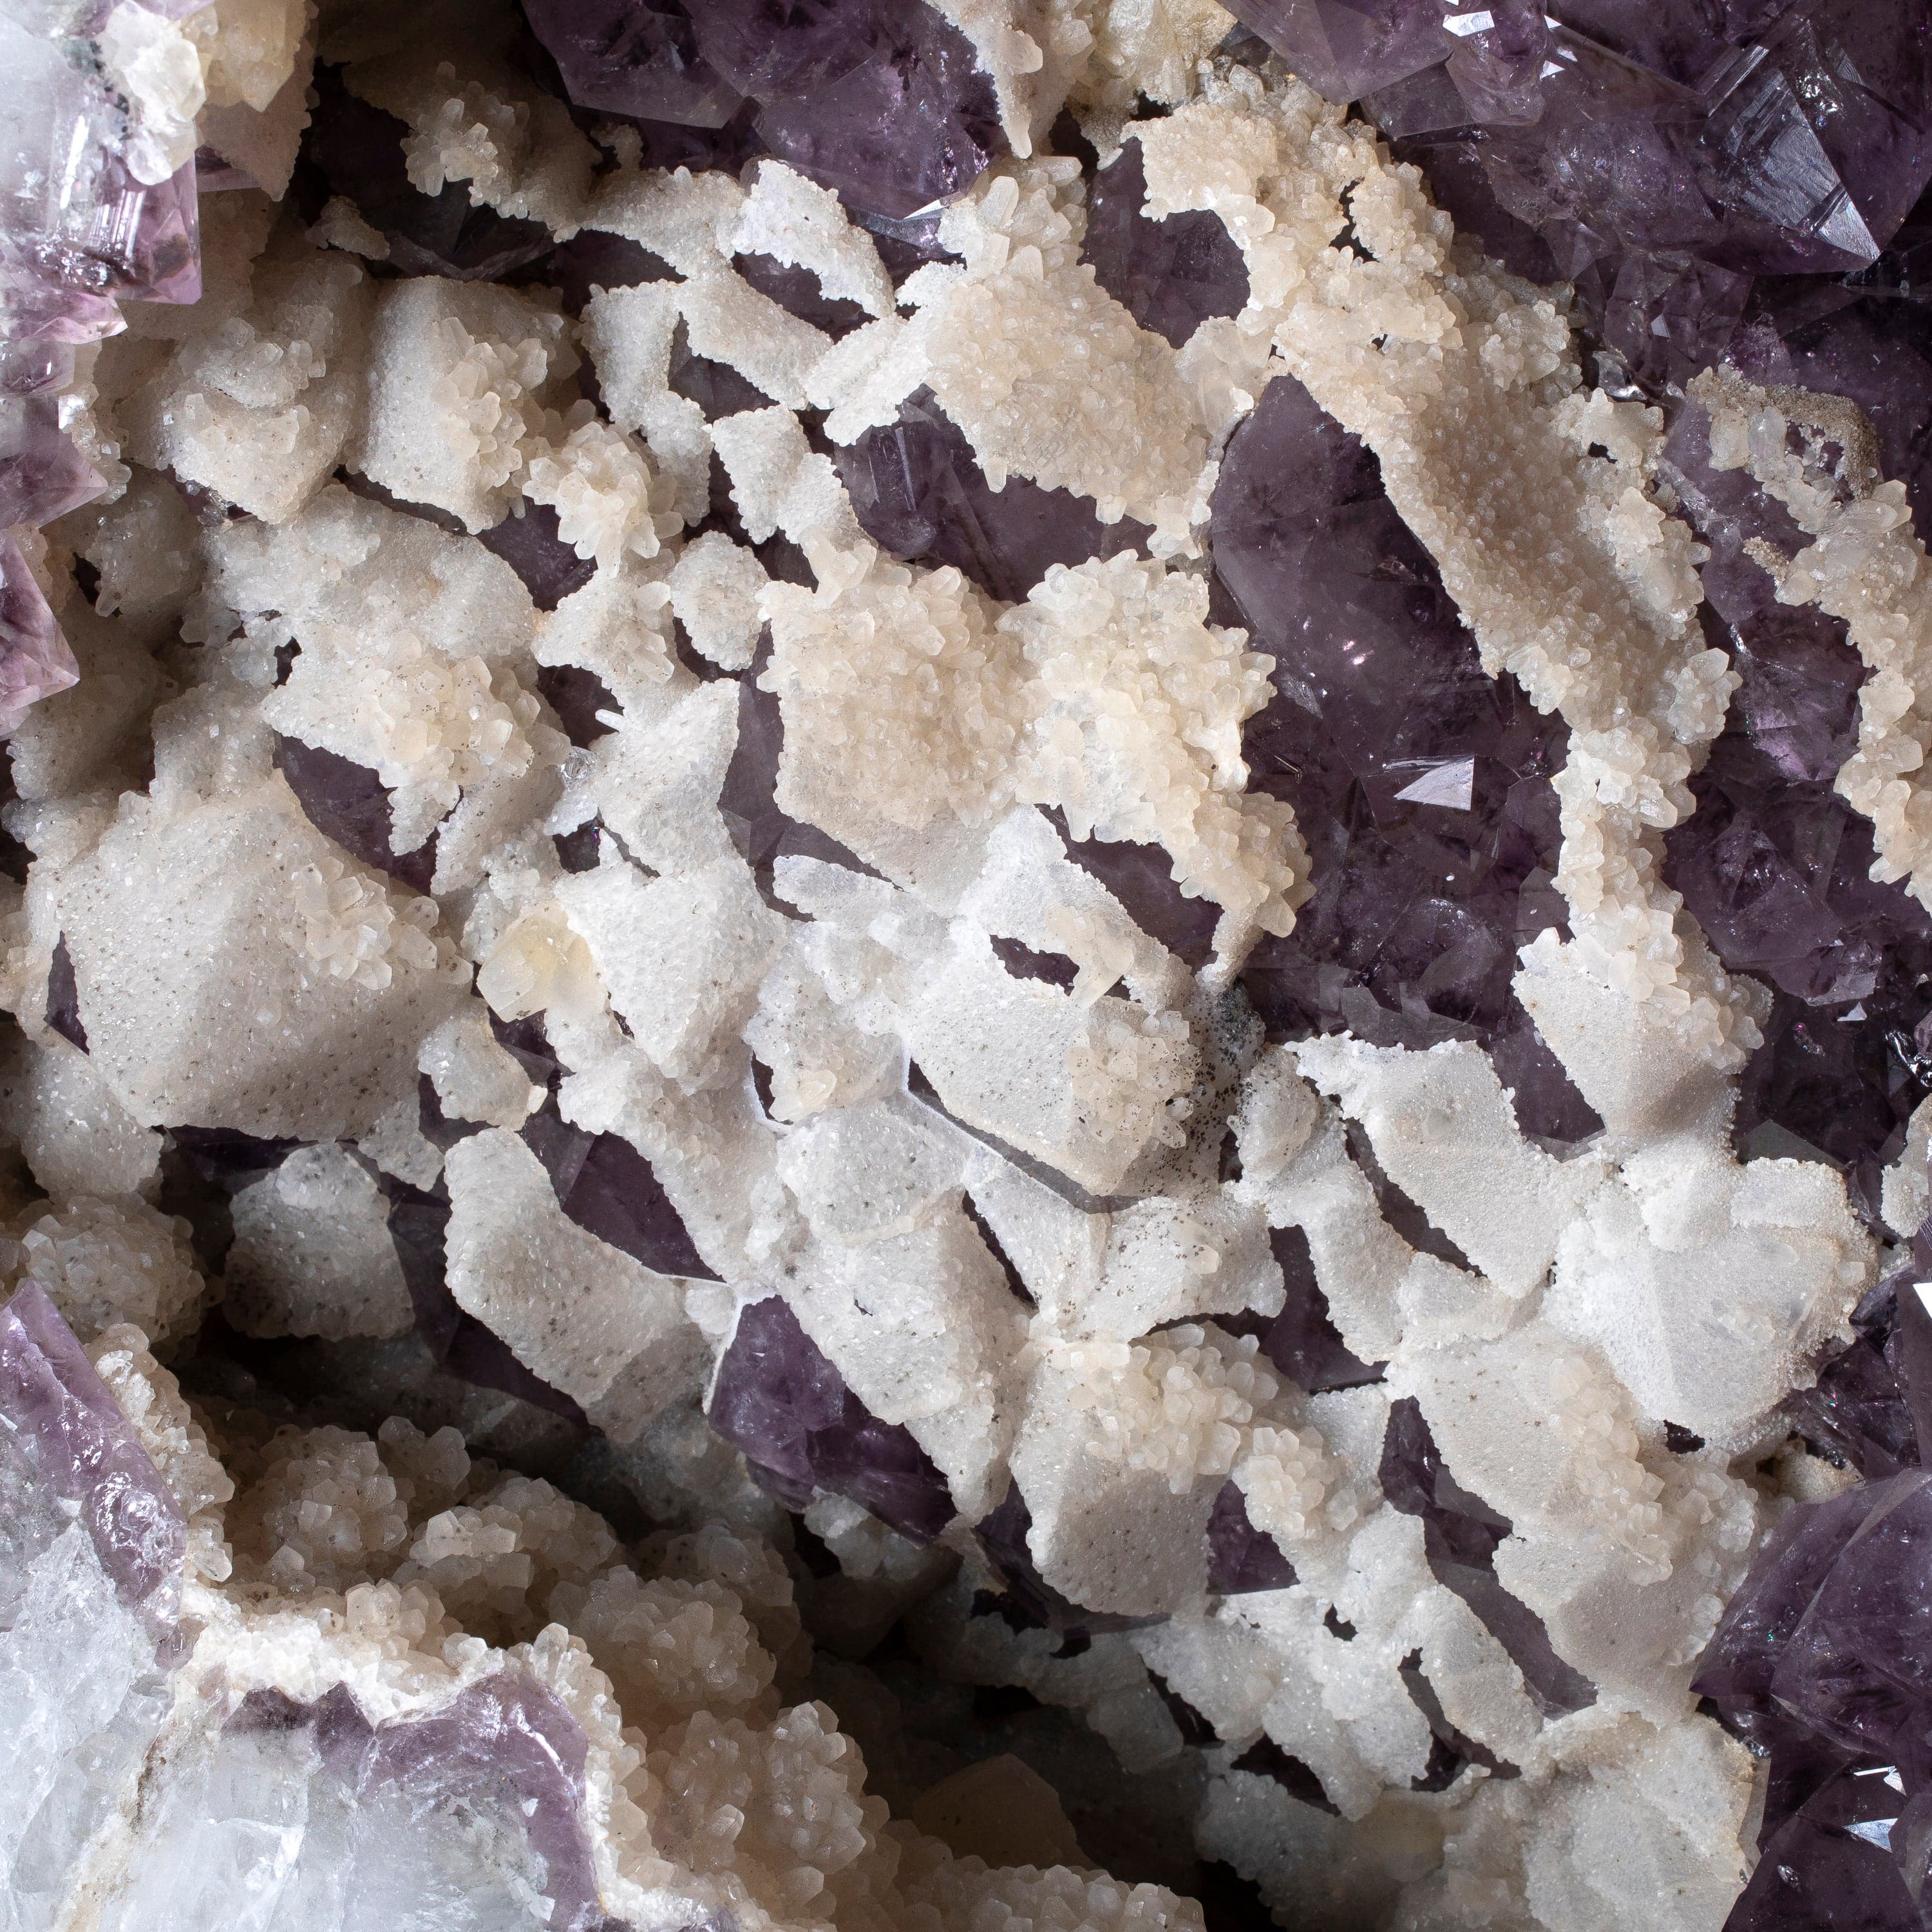 Kalifano Amethyst Amethyst Geode Wings with Calcite from Brazil on Custom Stand- 69" / 305lbs BAG40000.001